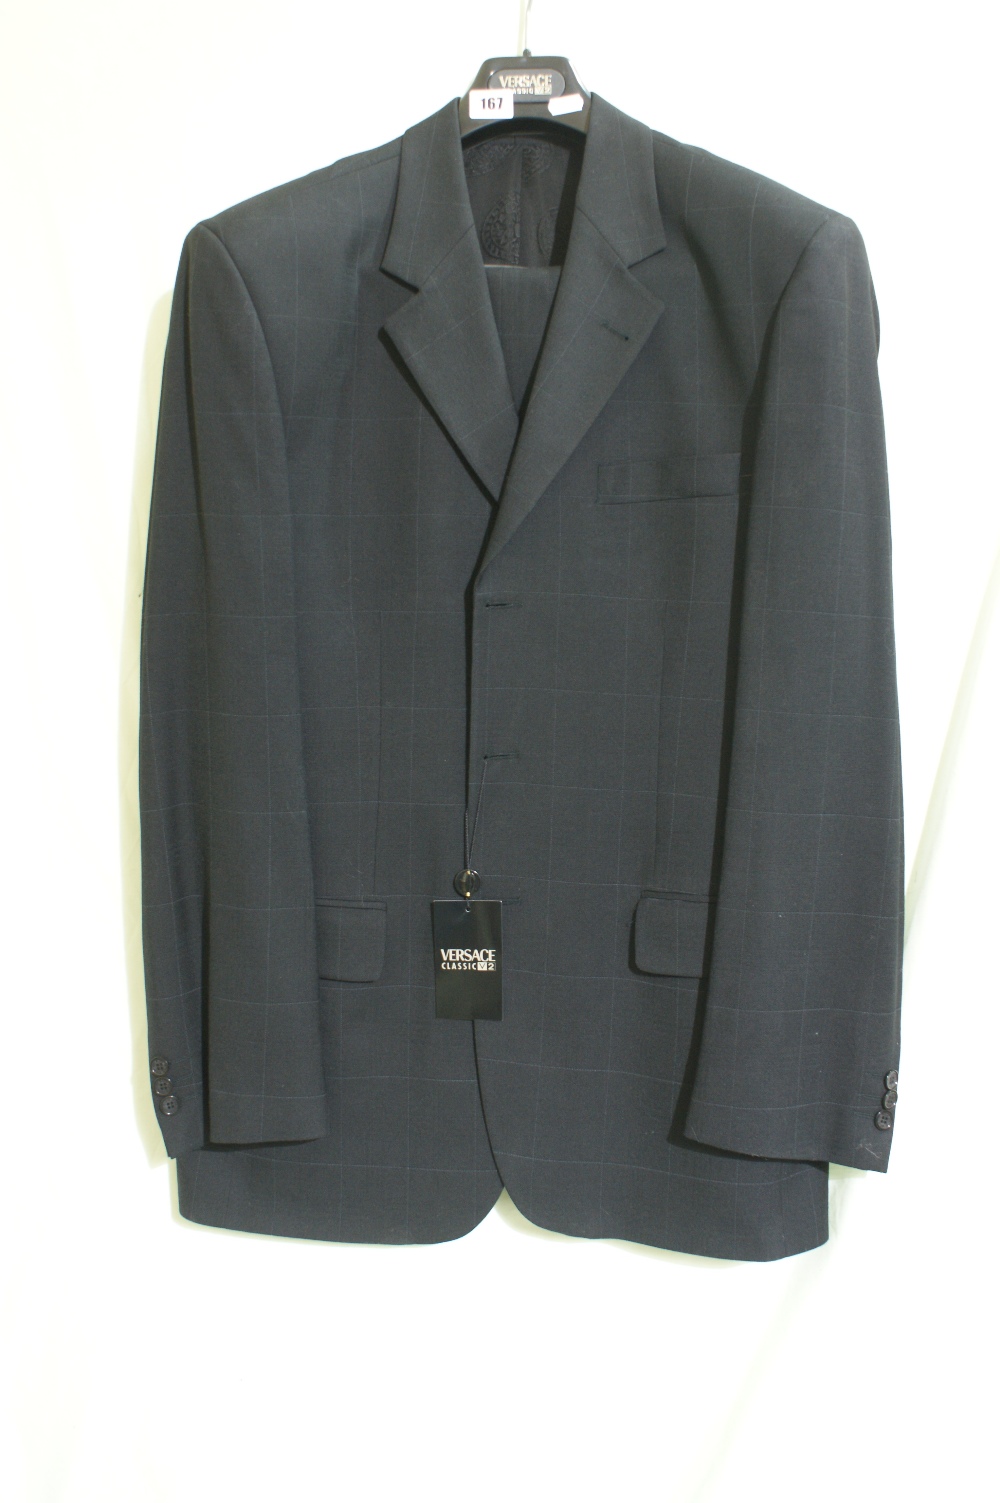 A Versace Mens Two Piece, Single Breasted Suit With Original Ticket, Size 46r Chest